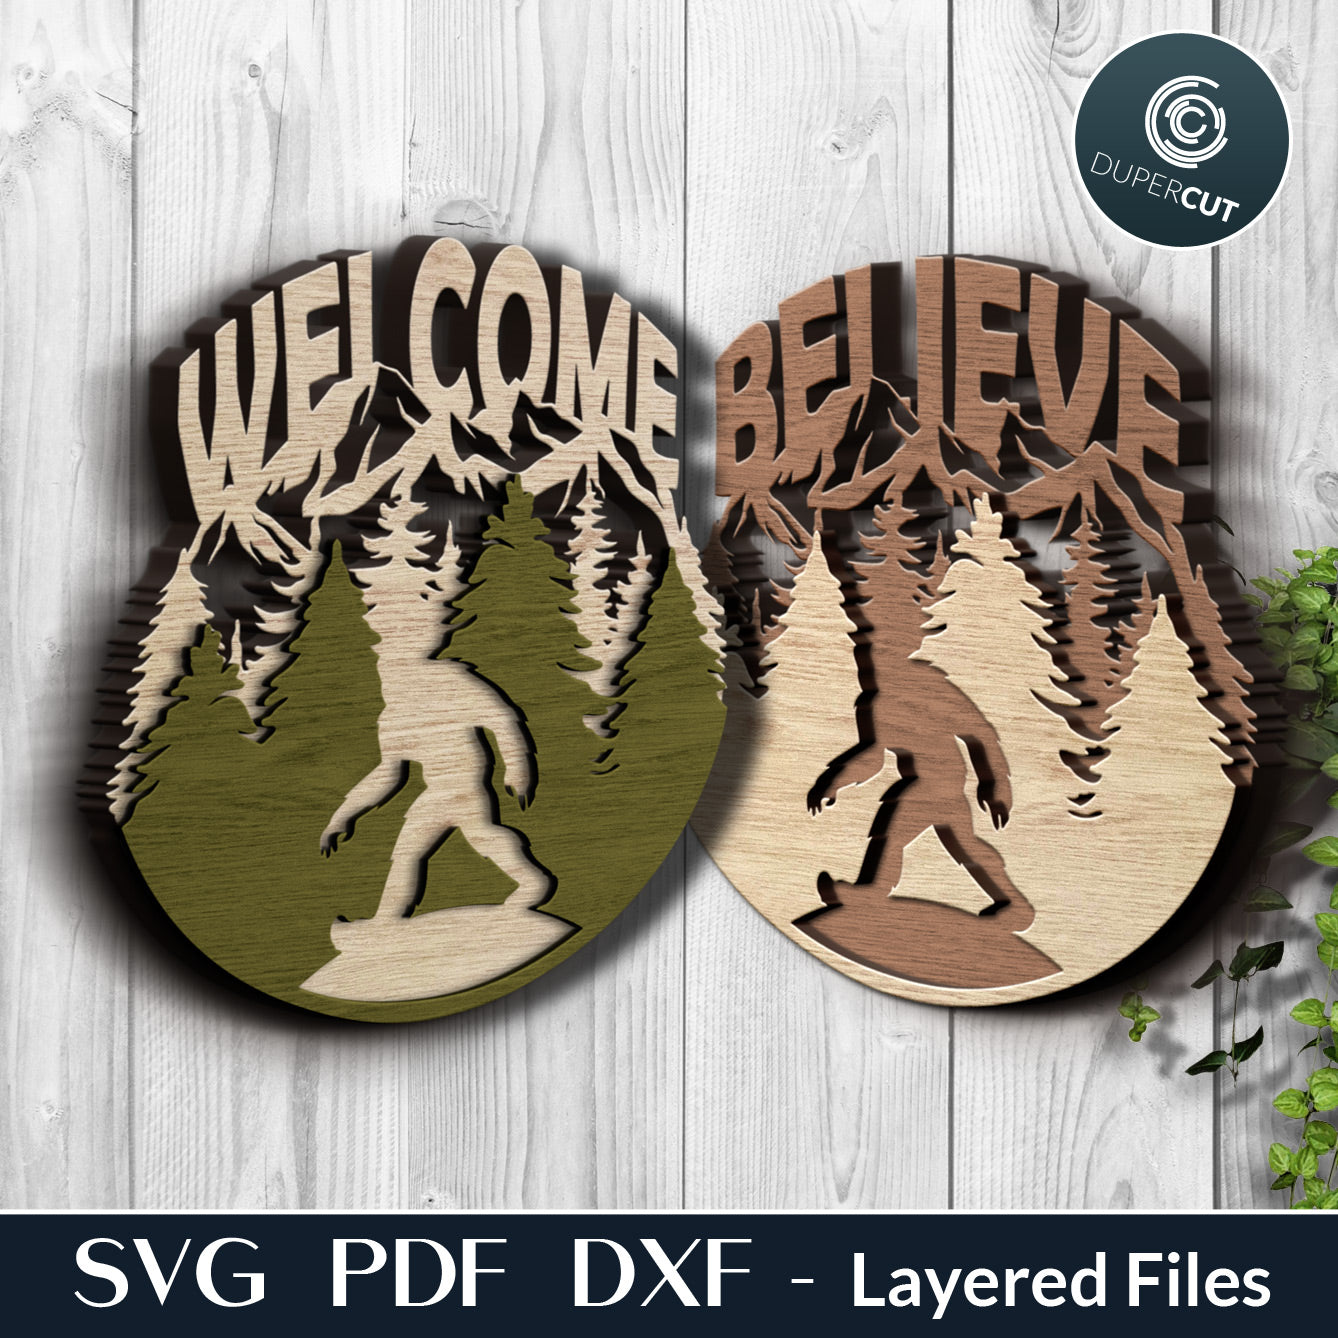 Bigfoot welcome signs - layered laser cutting files SVG PDF DXF templates for commercial use. Glowforge, Cricut, Silhouette Cameo, CNC plasma machines